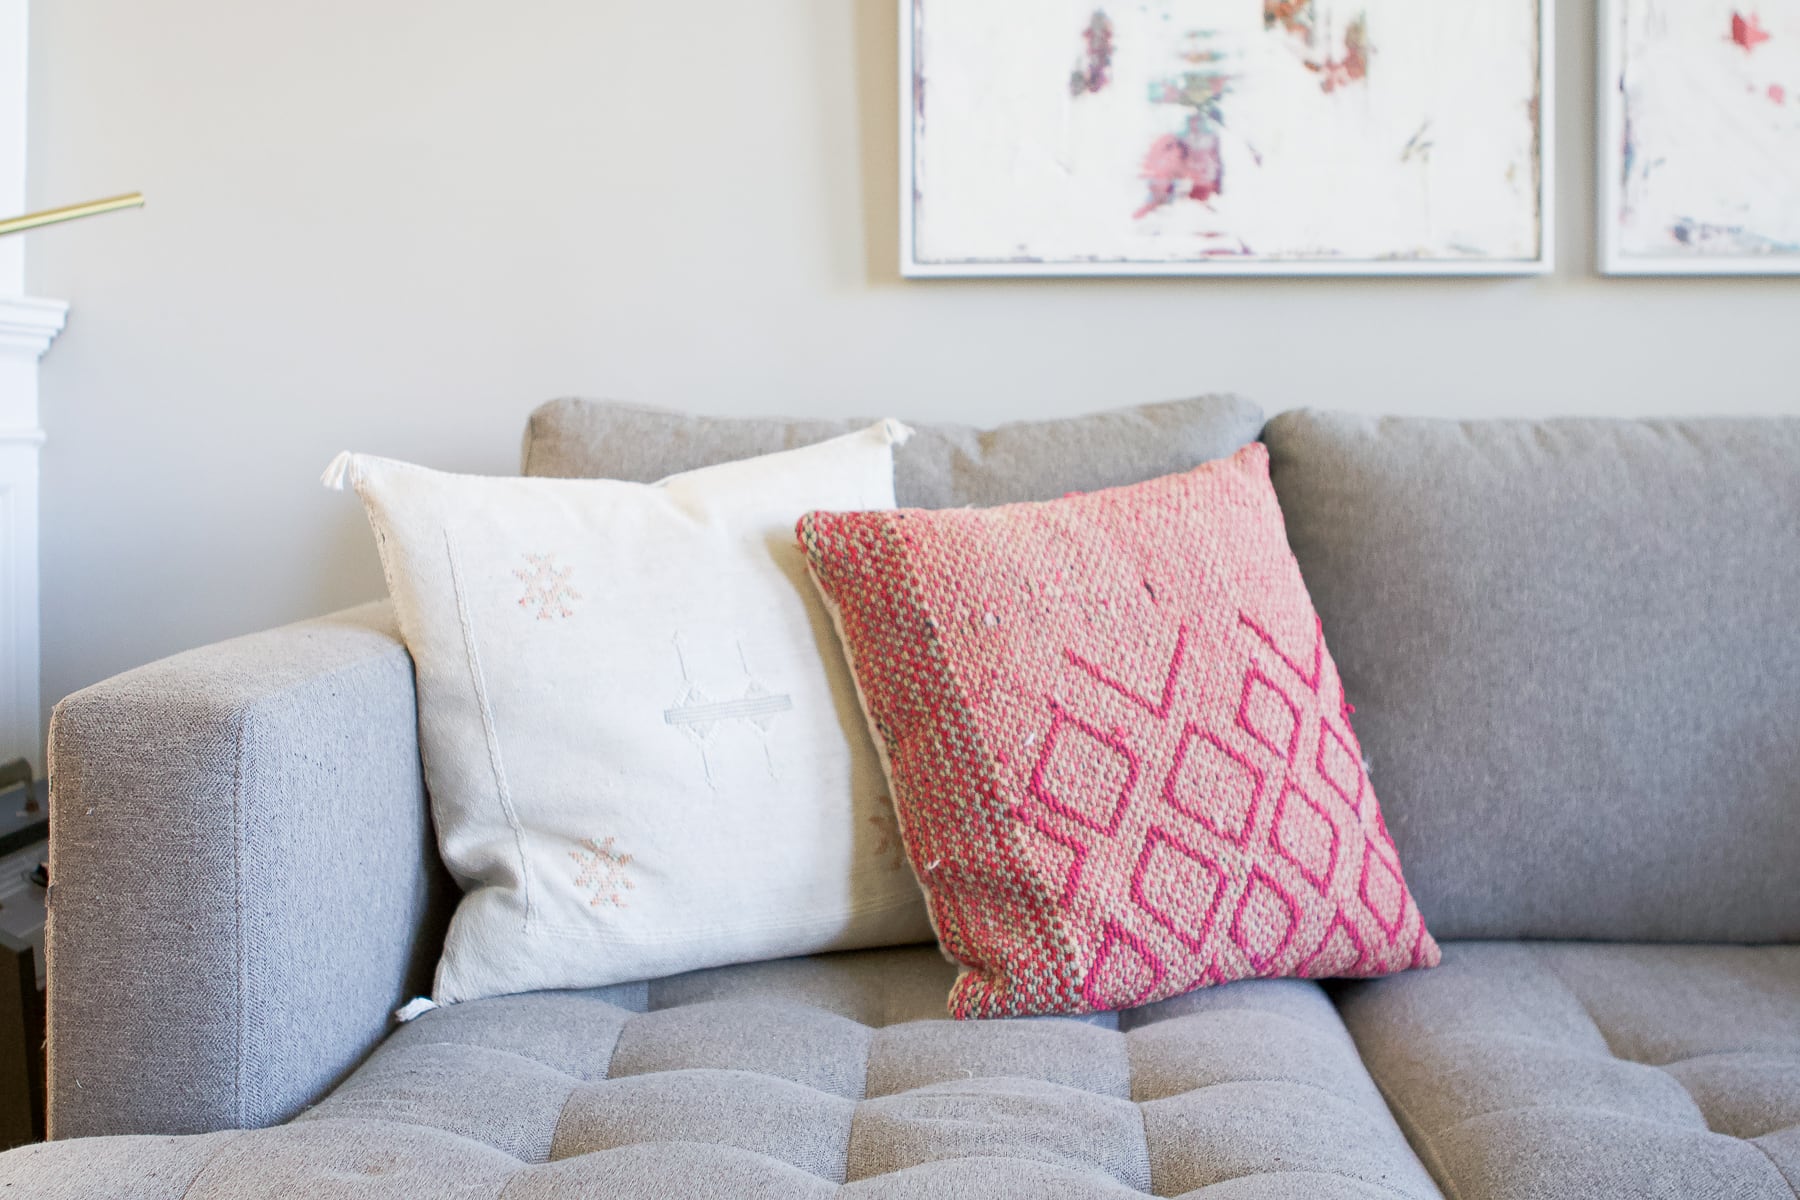 Adding pink textiles to the couch